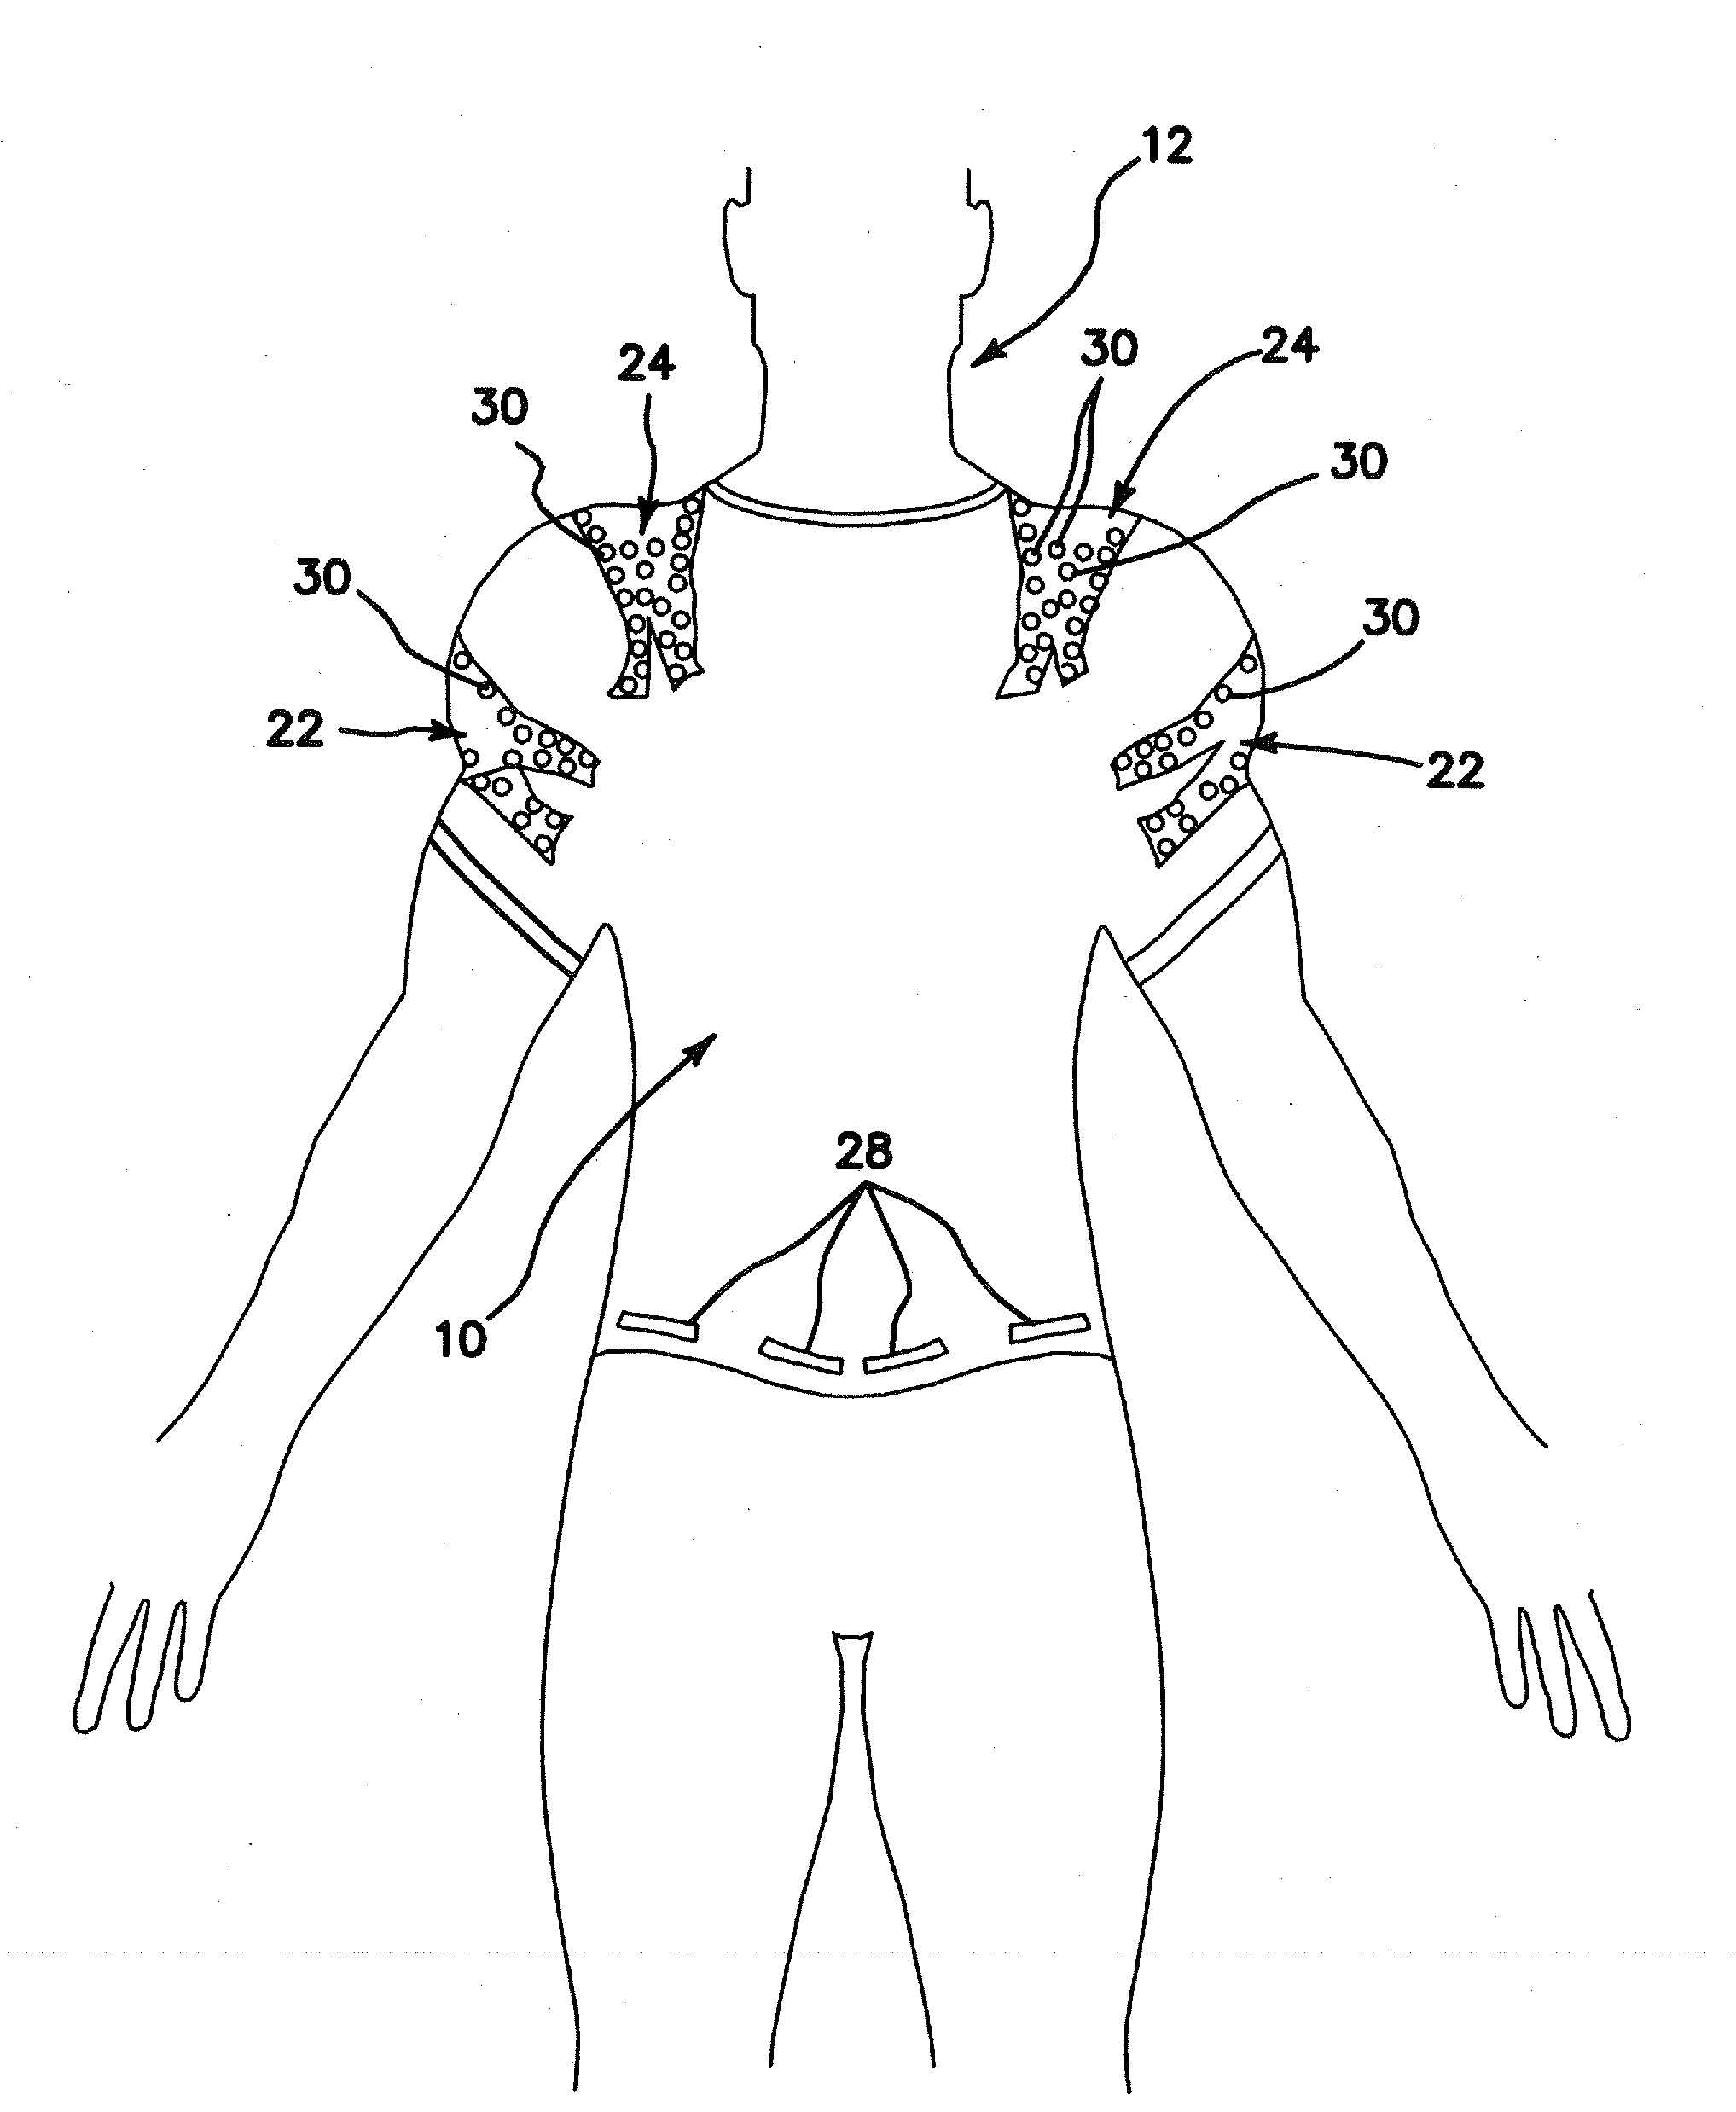 Posture improvement devices and methods for use